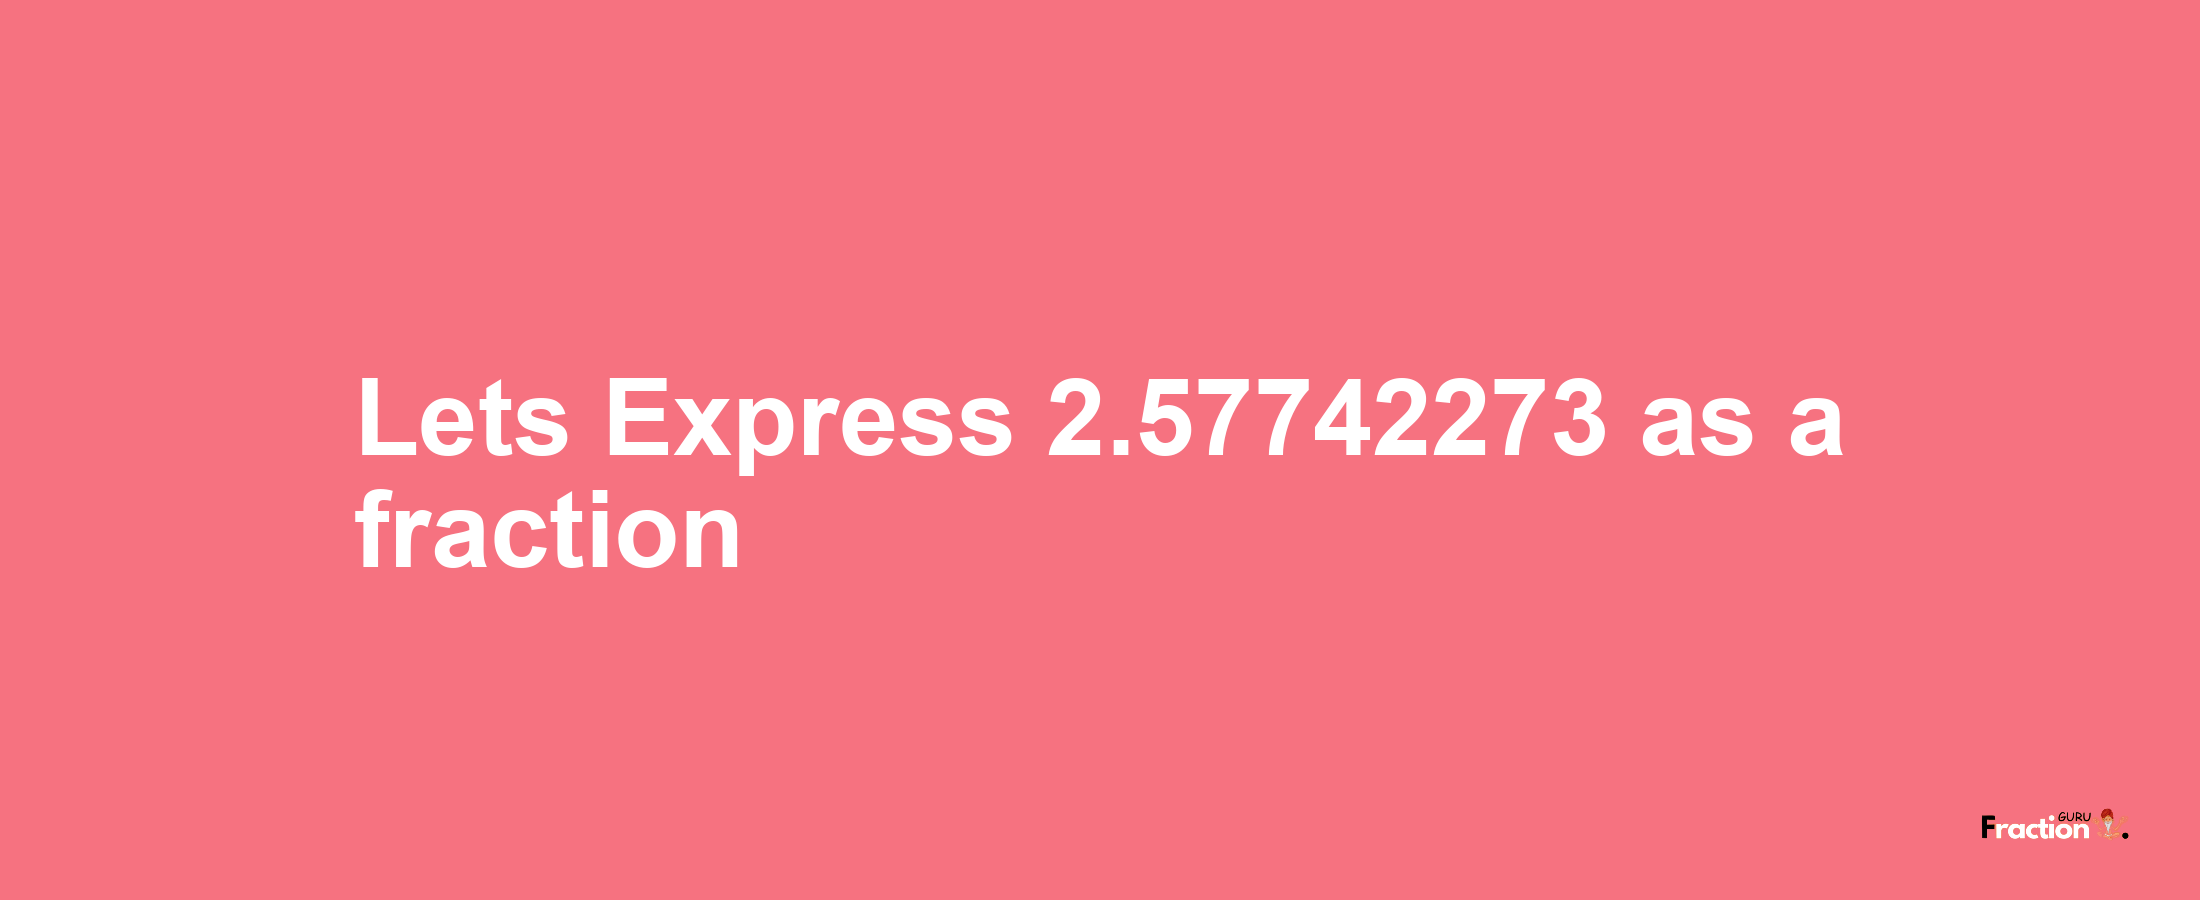 Lets Express 2.57742273 as afraction